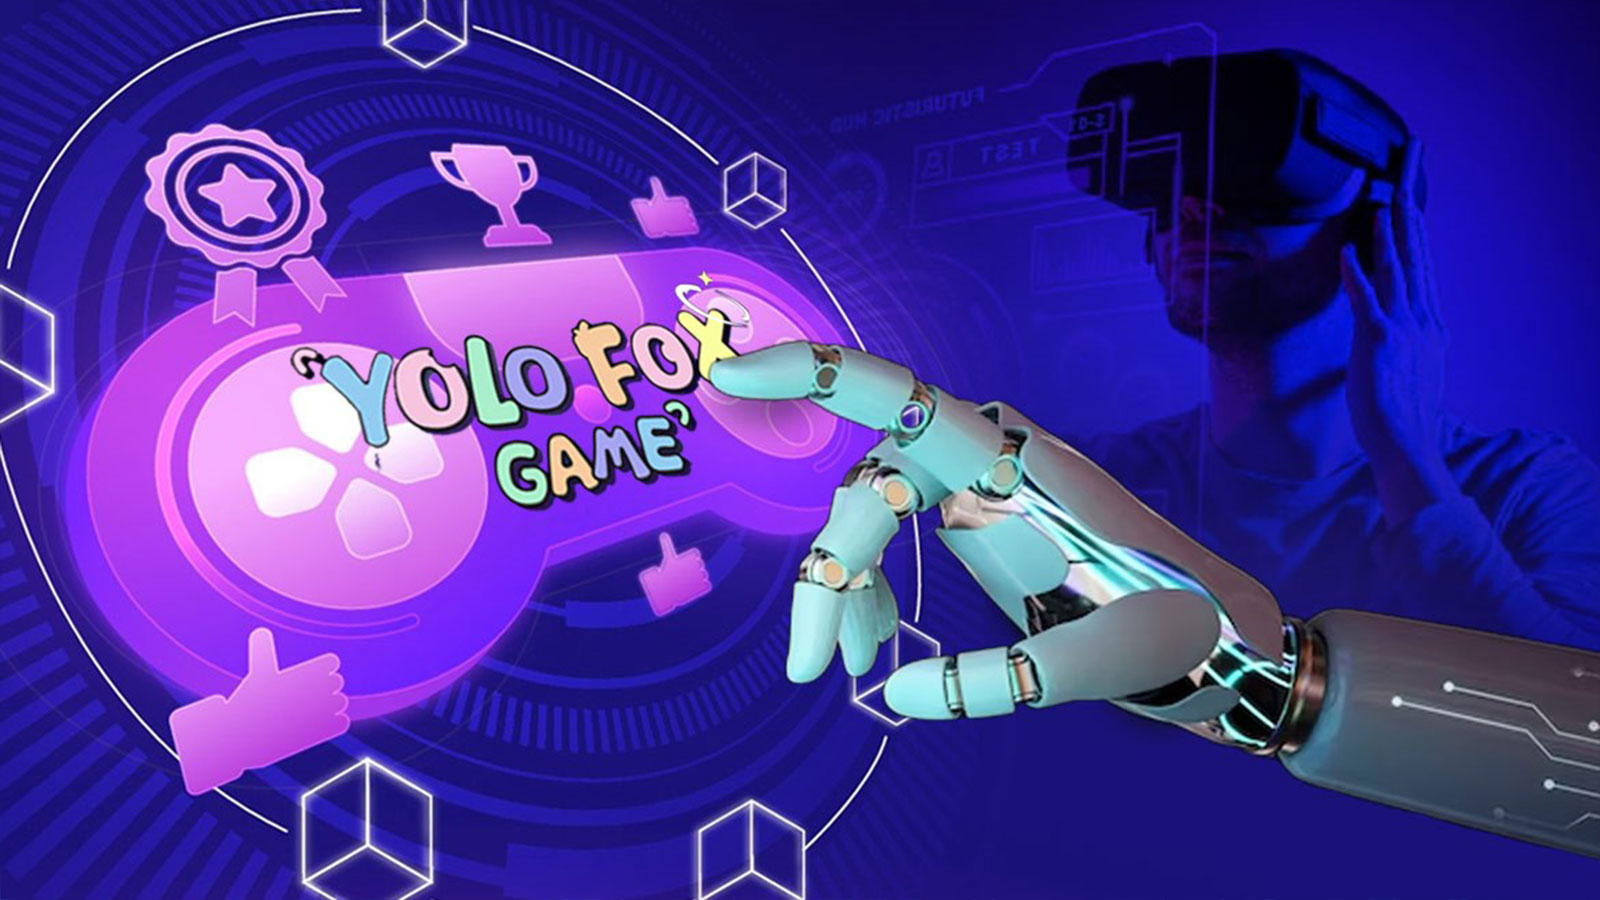 Yolofox Game Collaborates with FuXi Lab to Bring AI Technology to the Web3 Game Industry